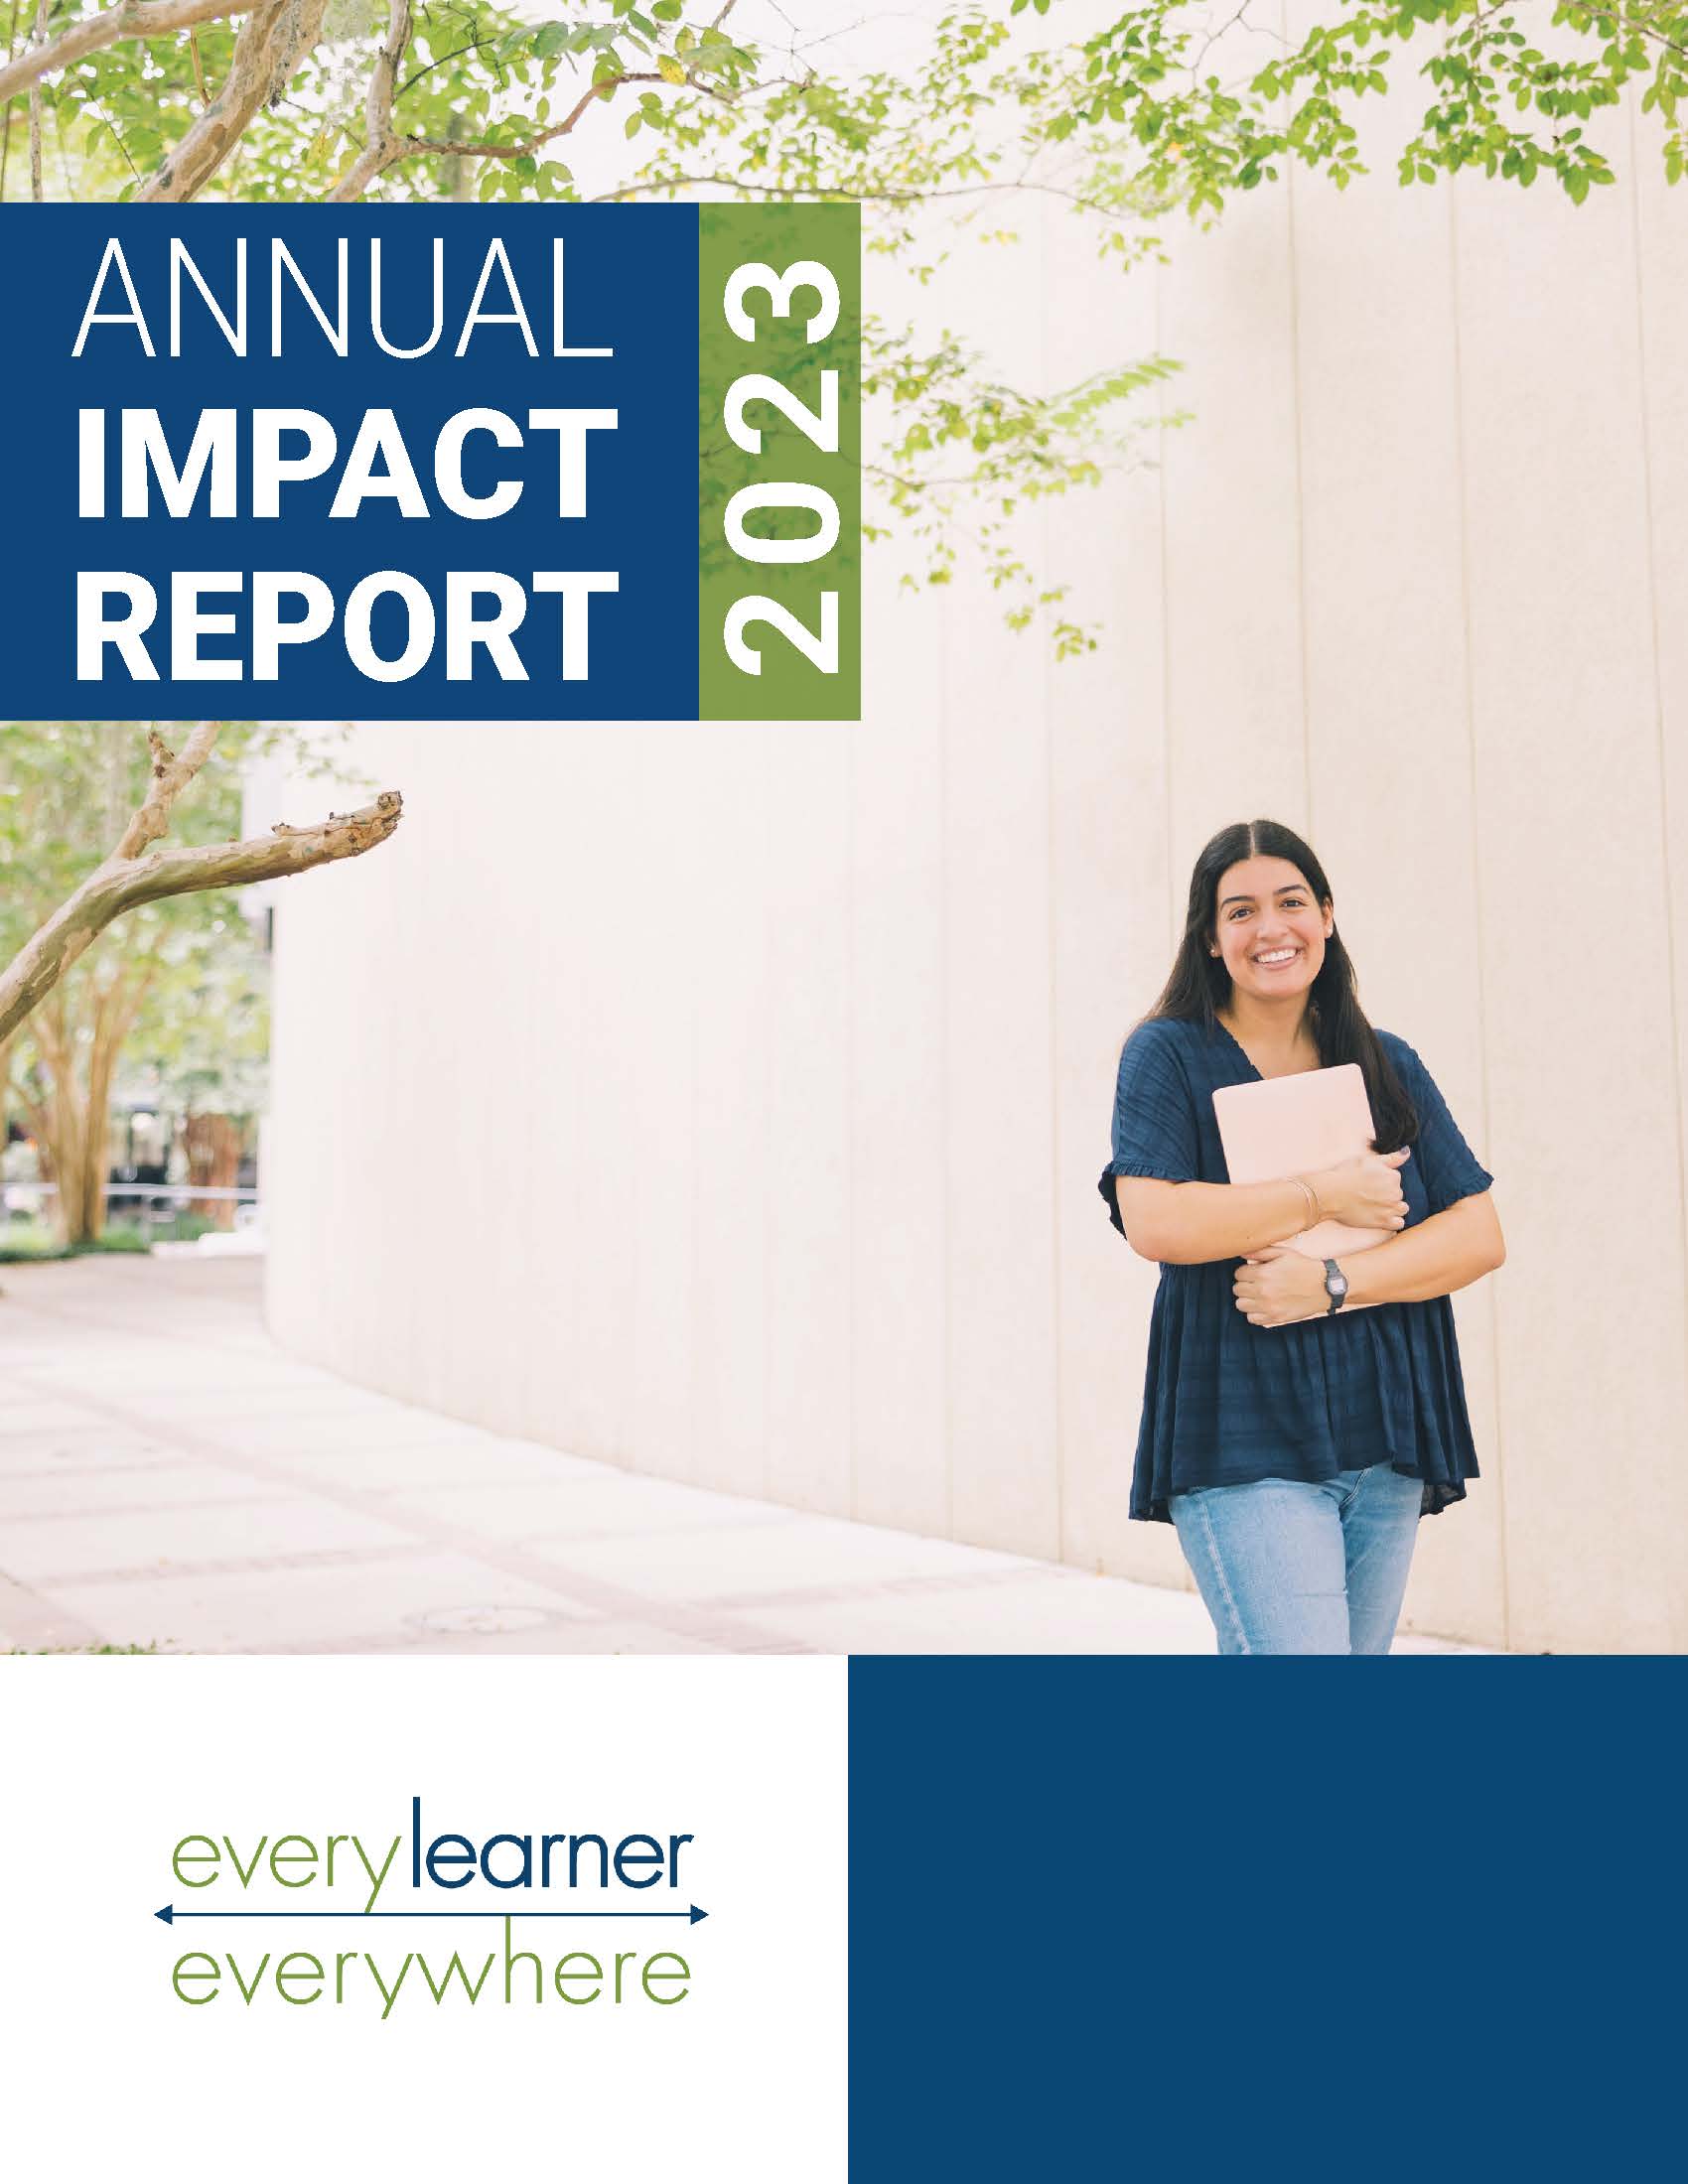 Annual Impact Report Cover with female student on campus holding laptop.